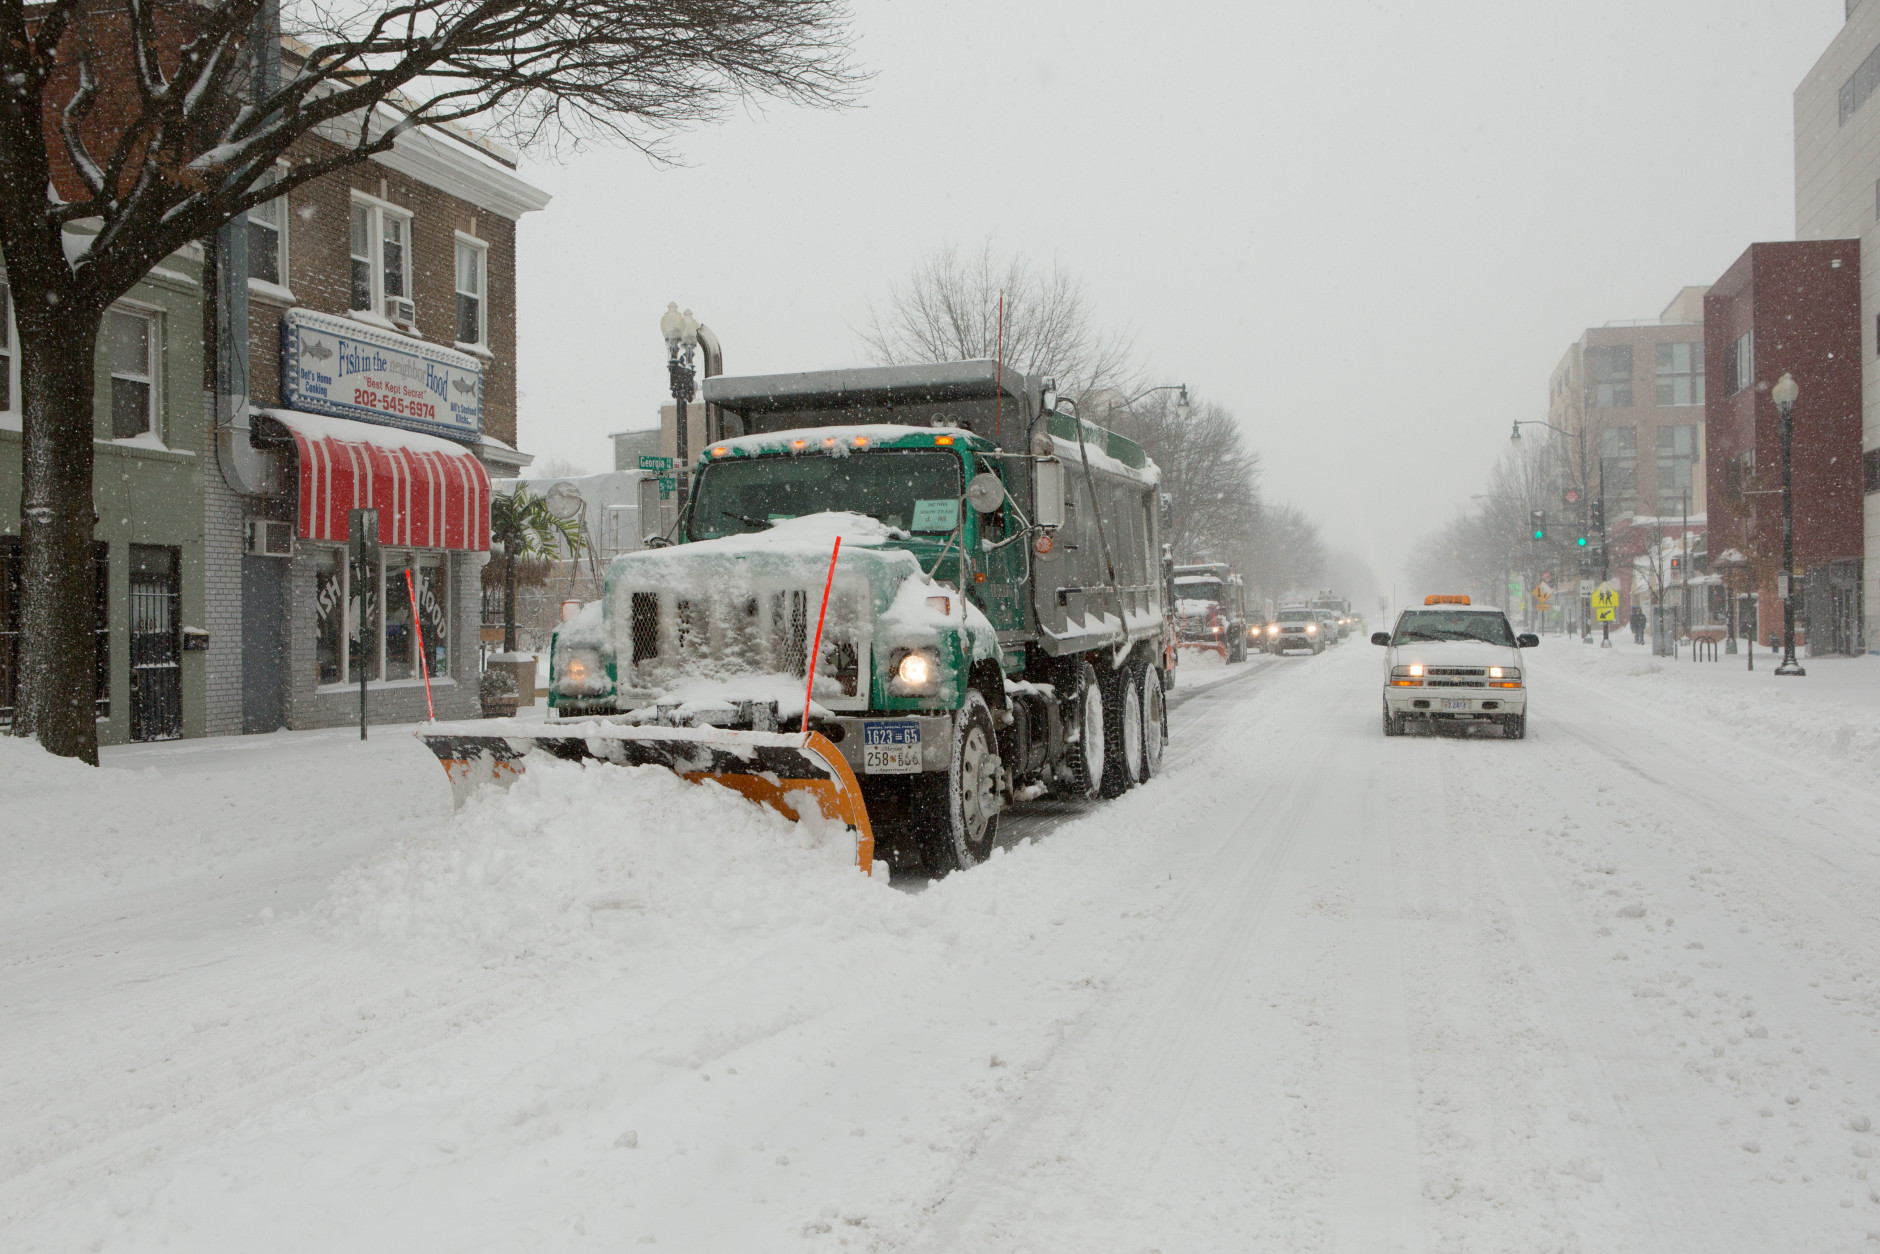 A phalanx of snow plows and city vehicles move north on Georgia Ave. in the Petworth neighborhood on January 23, 2016 in Washington, DC. Over a foot of snow has already fallen in the city in the past 24 hours, in what experts say could be a record-breaking storm. (Photo by Allison Shelley/Getty Images)